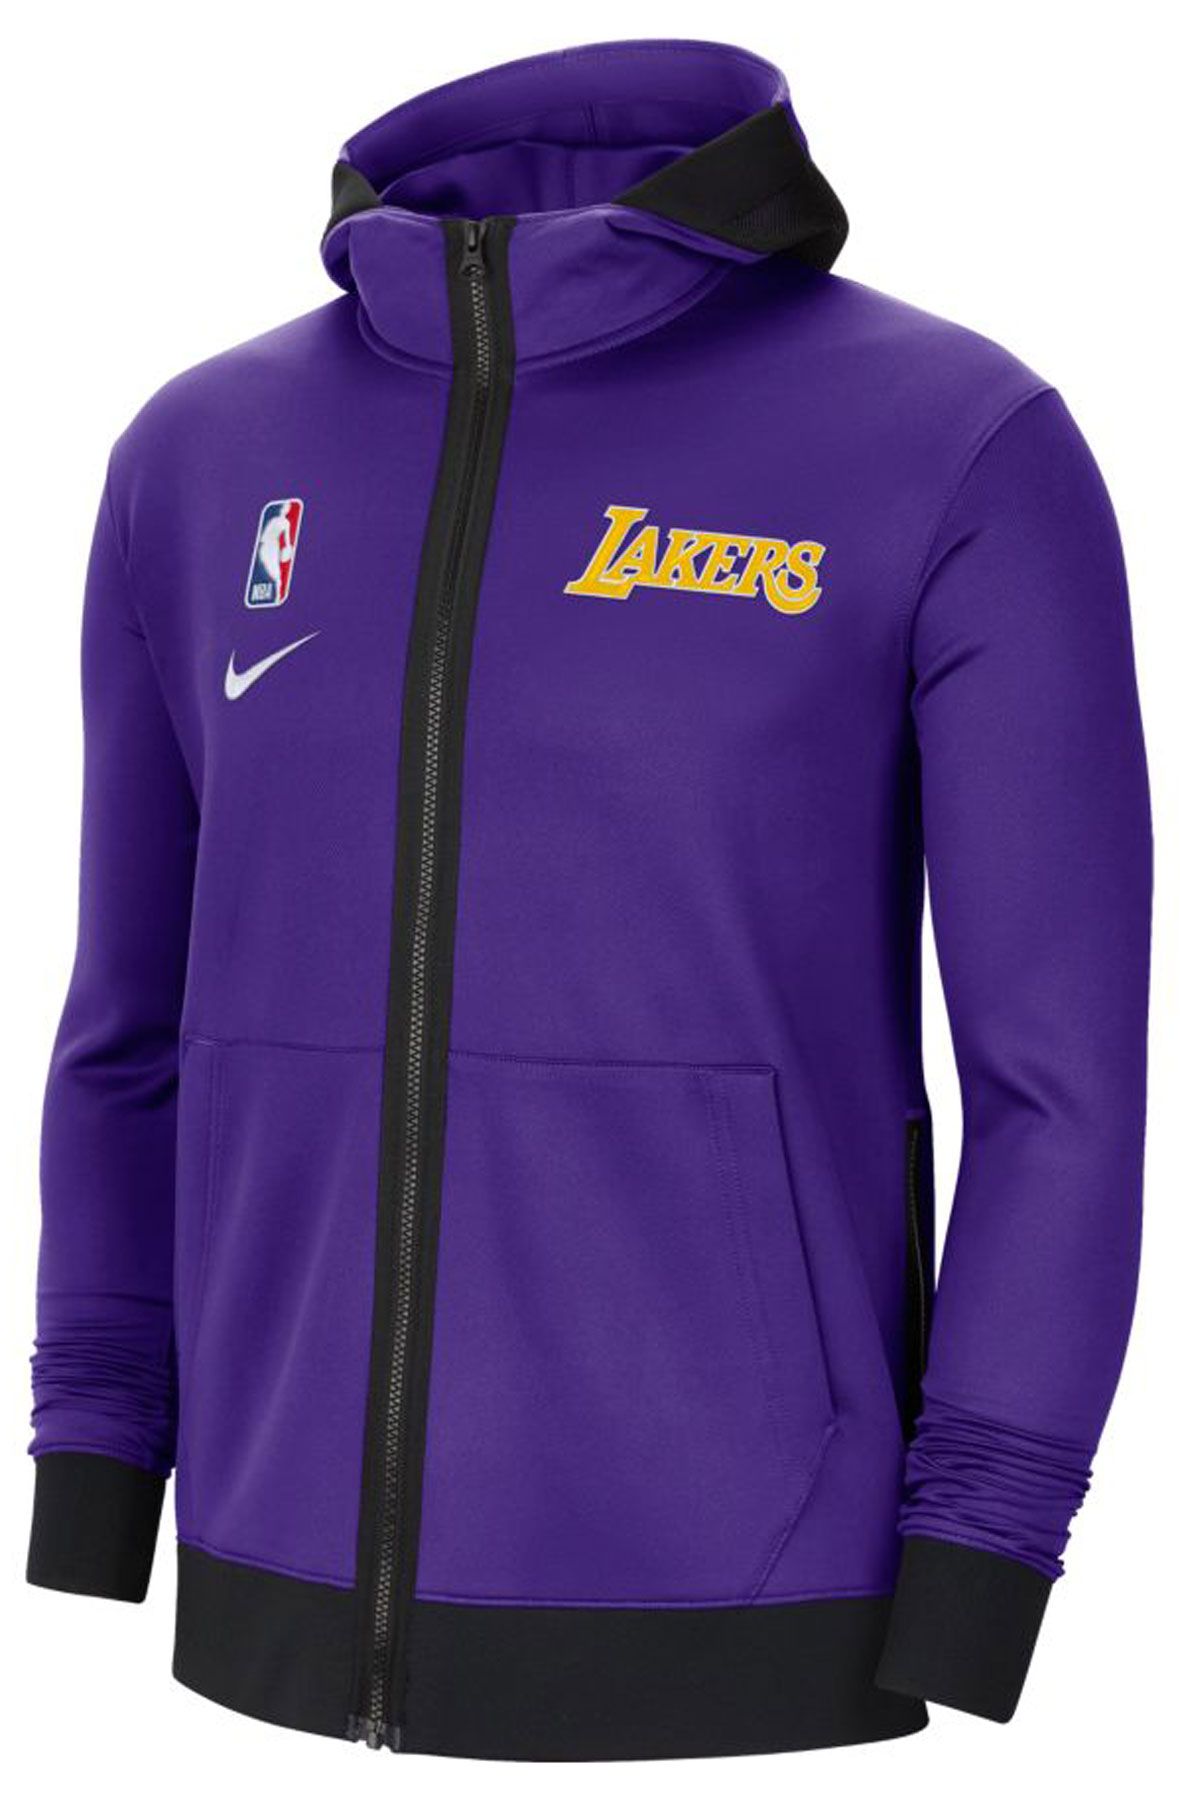 Los Angeles Lakers Showtime Jacket 